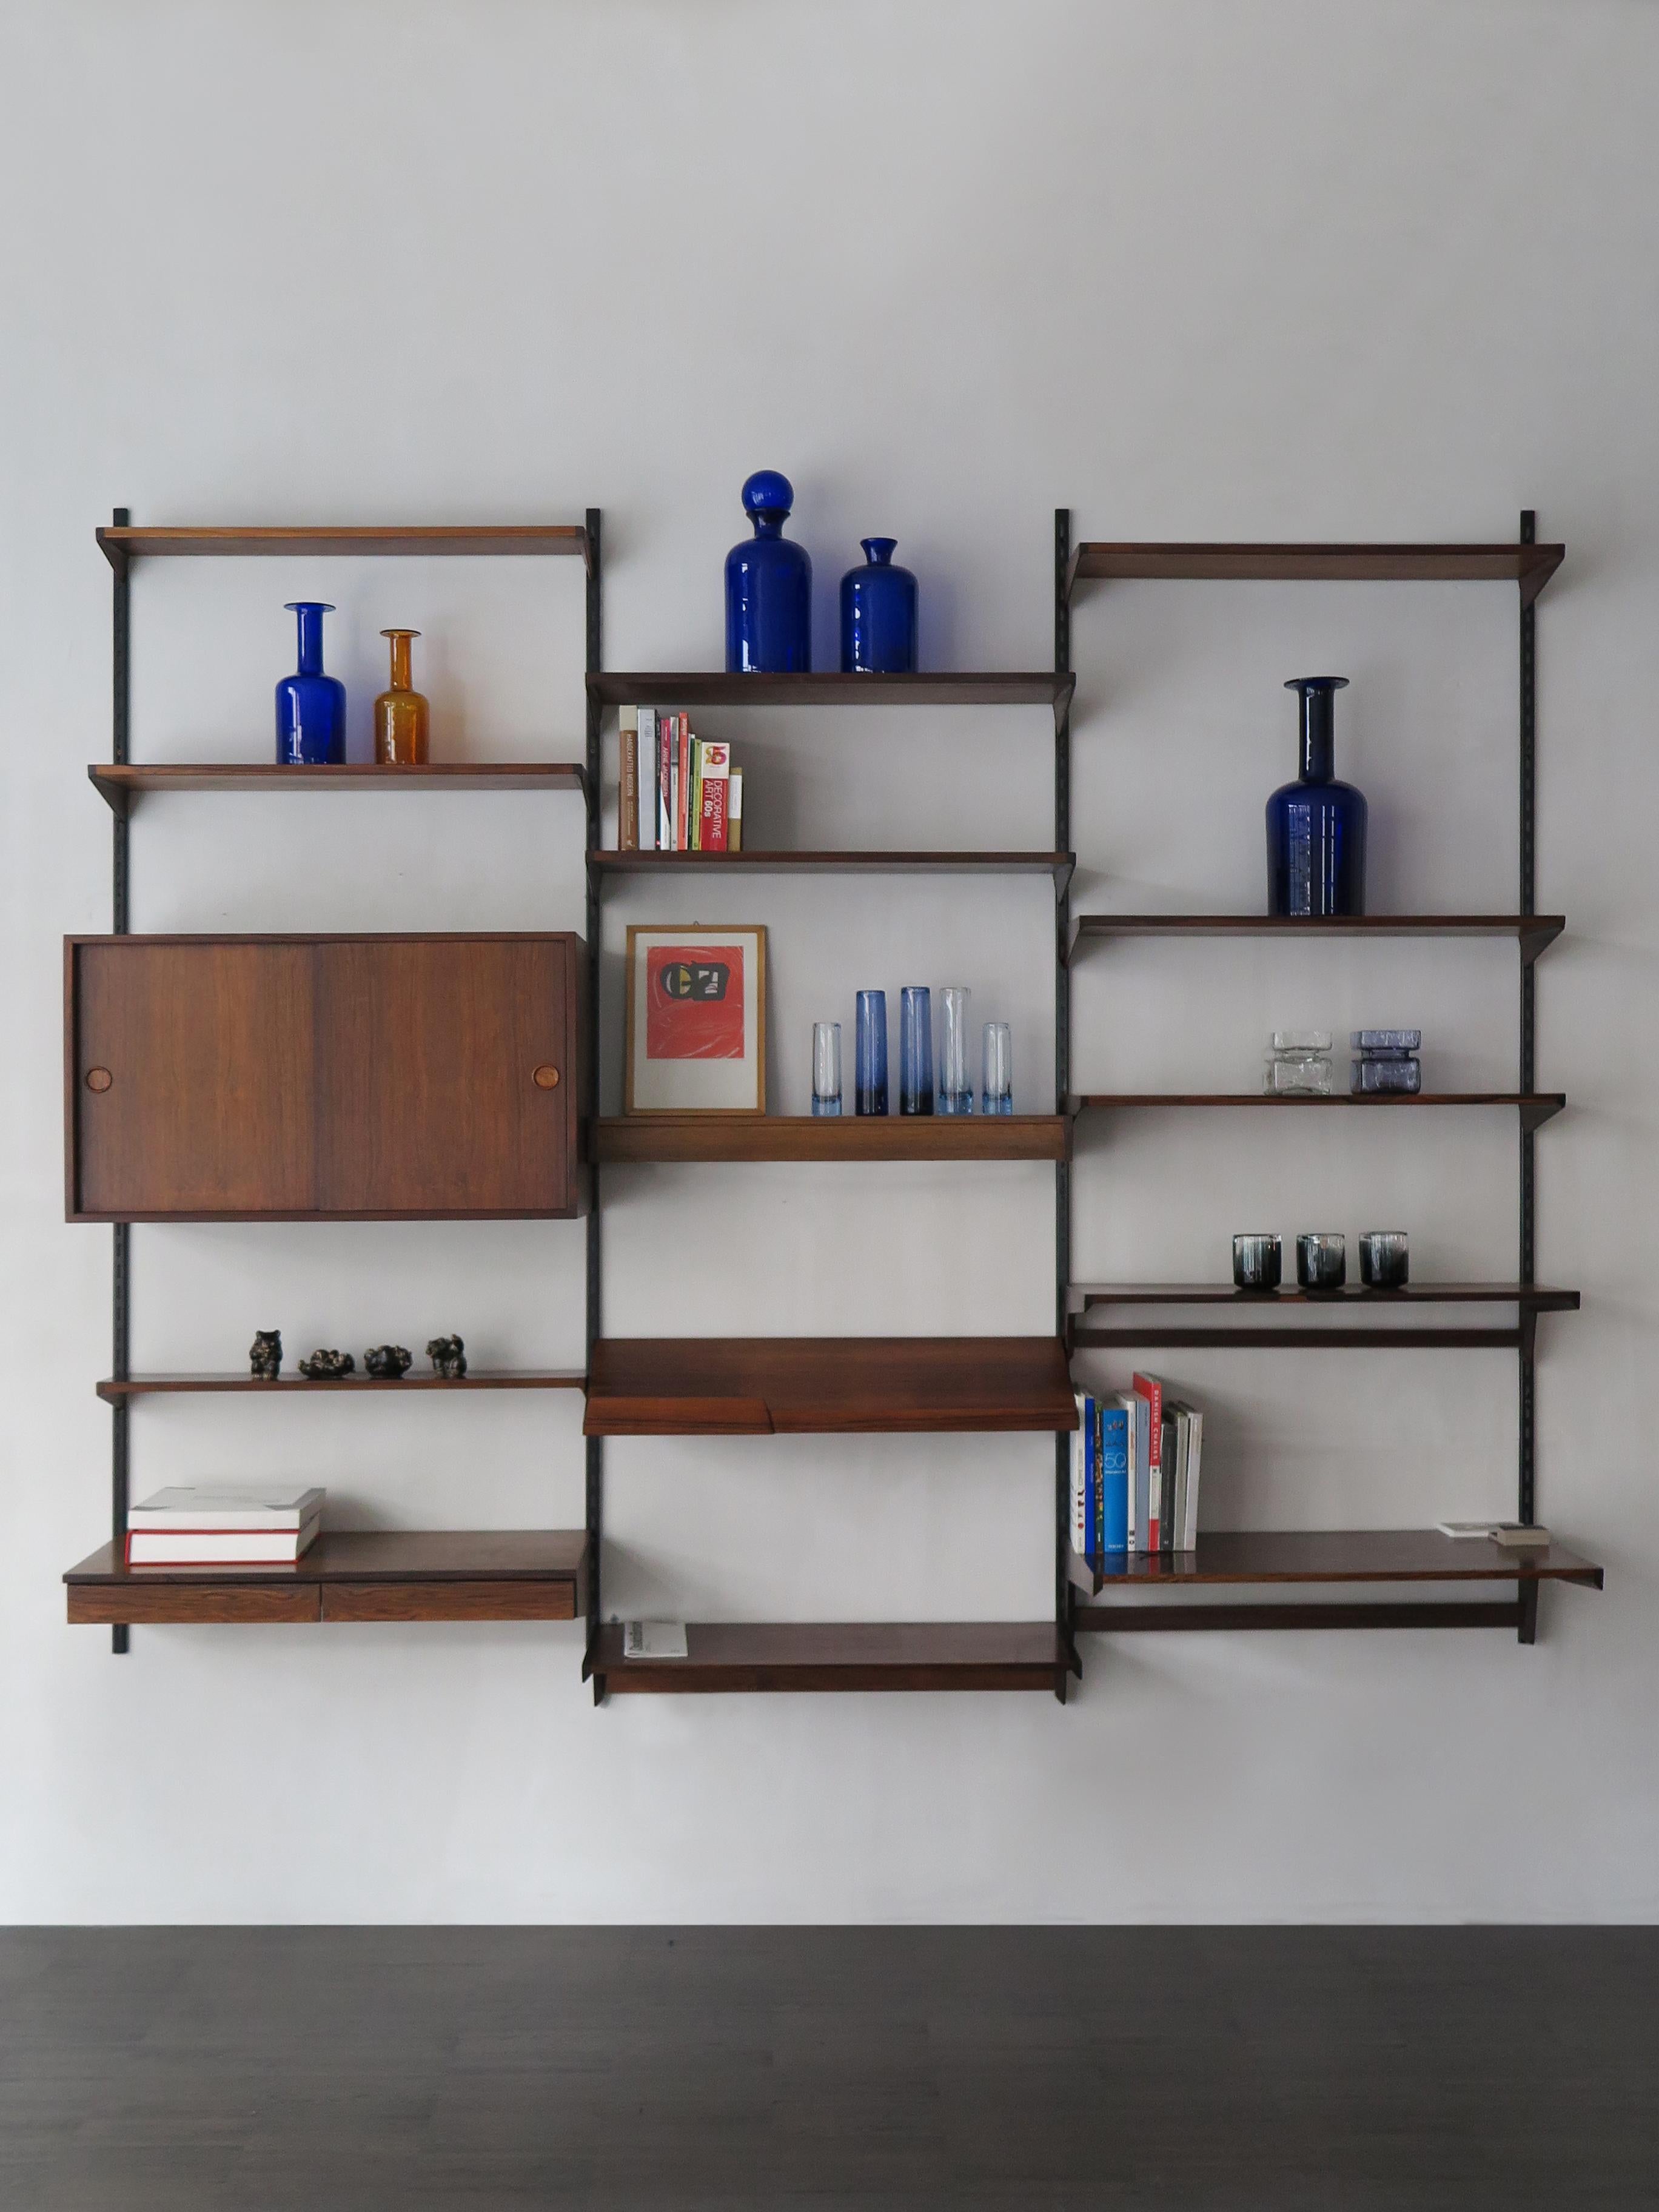 Danish dark wood shelving system designed by Kai Kristiansen for FM Møbler, shelves and container can be positioned as desired, circa 1960.
Please note that the item is original of the period and this shows normal signs of age and use.